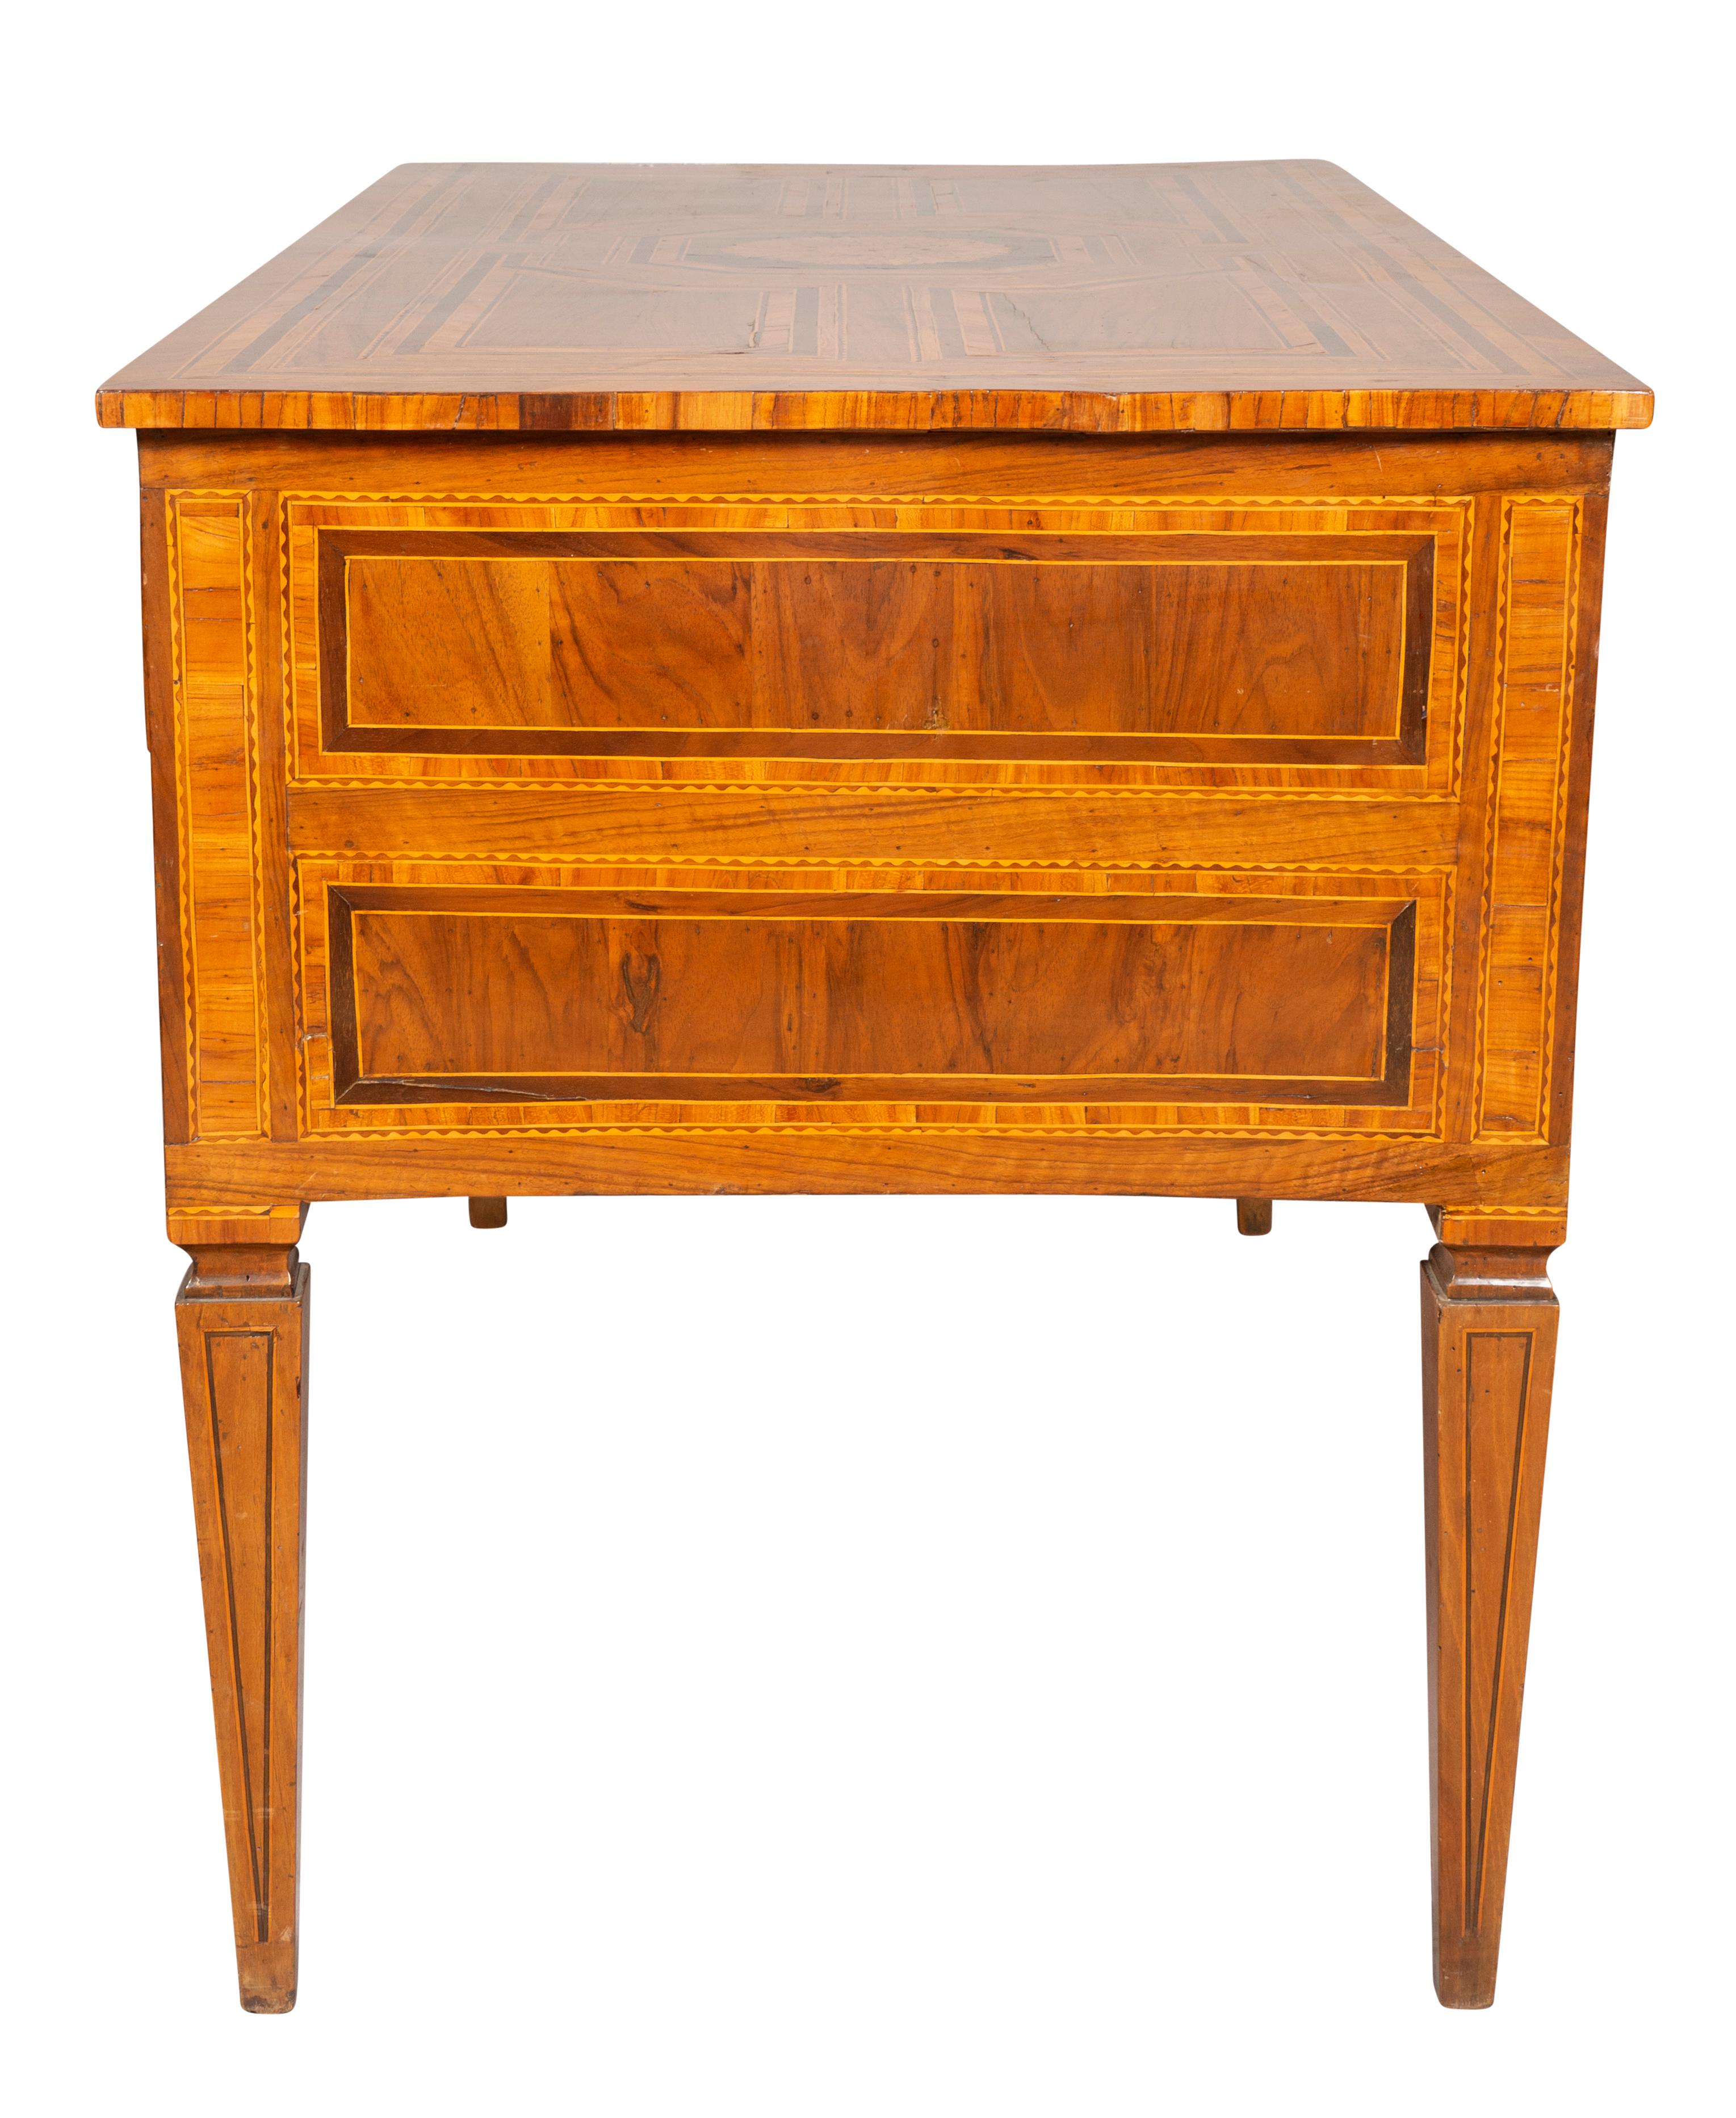 Early 19th Century North Italian Neoclassical Walnut and Inlaid Writing Table For Sale